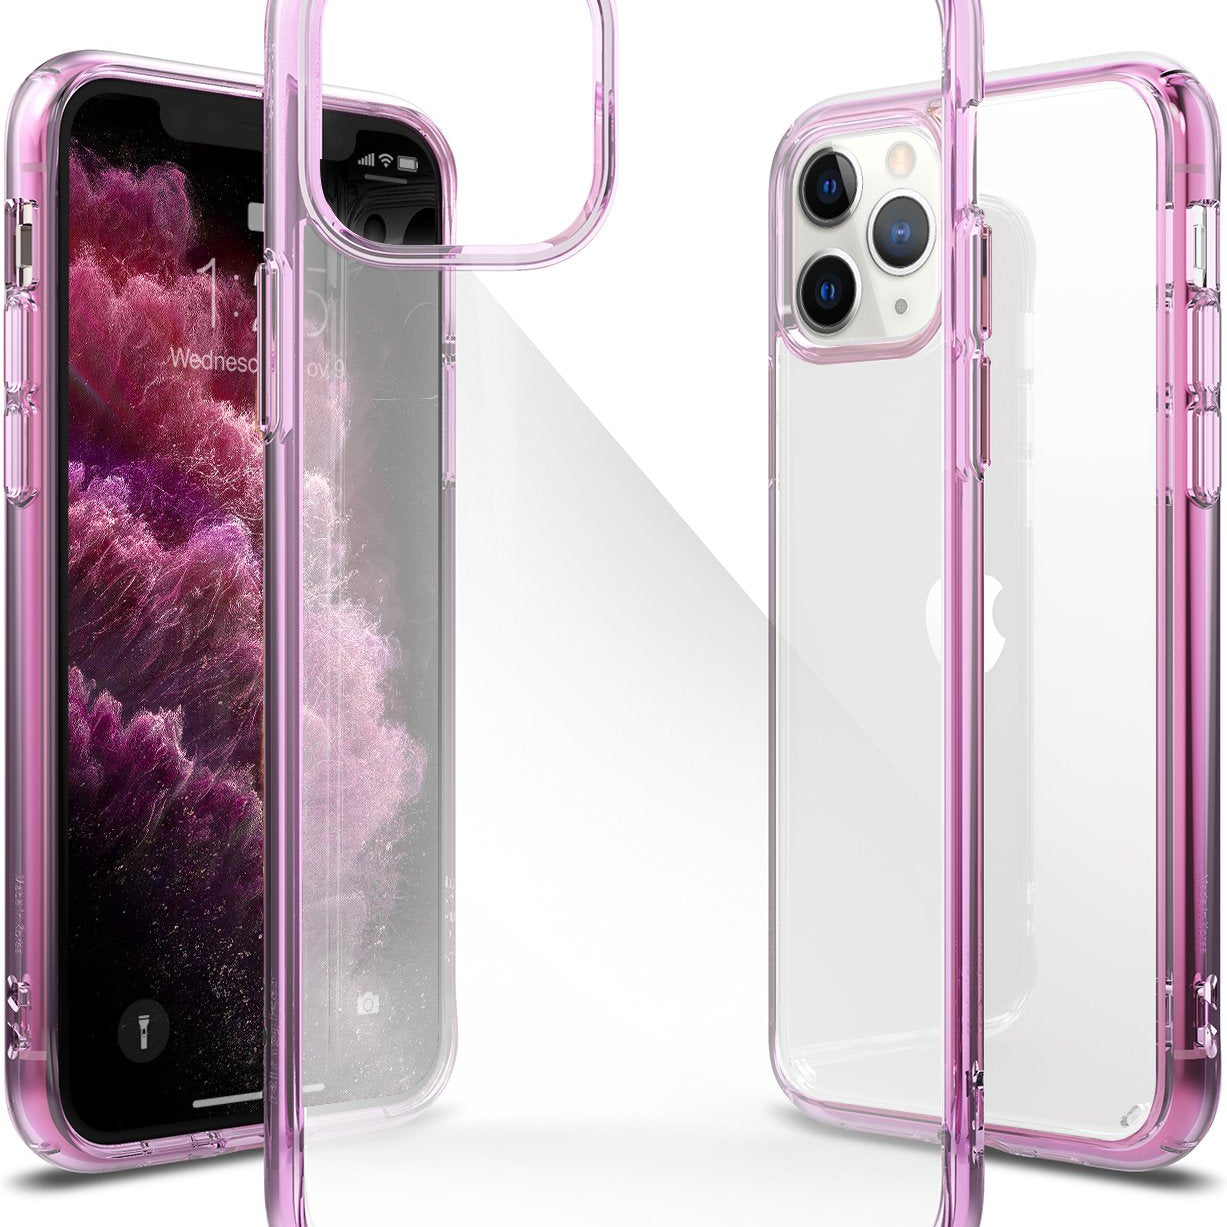 Ringke Fusion Designed for iPhone 11 Pro Max Case iPhone XI Pro Max Case Cover lavender